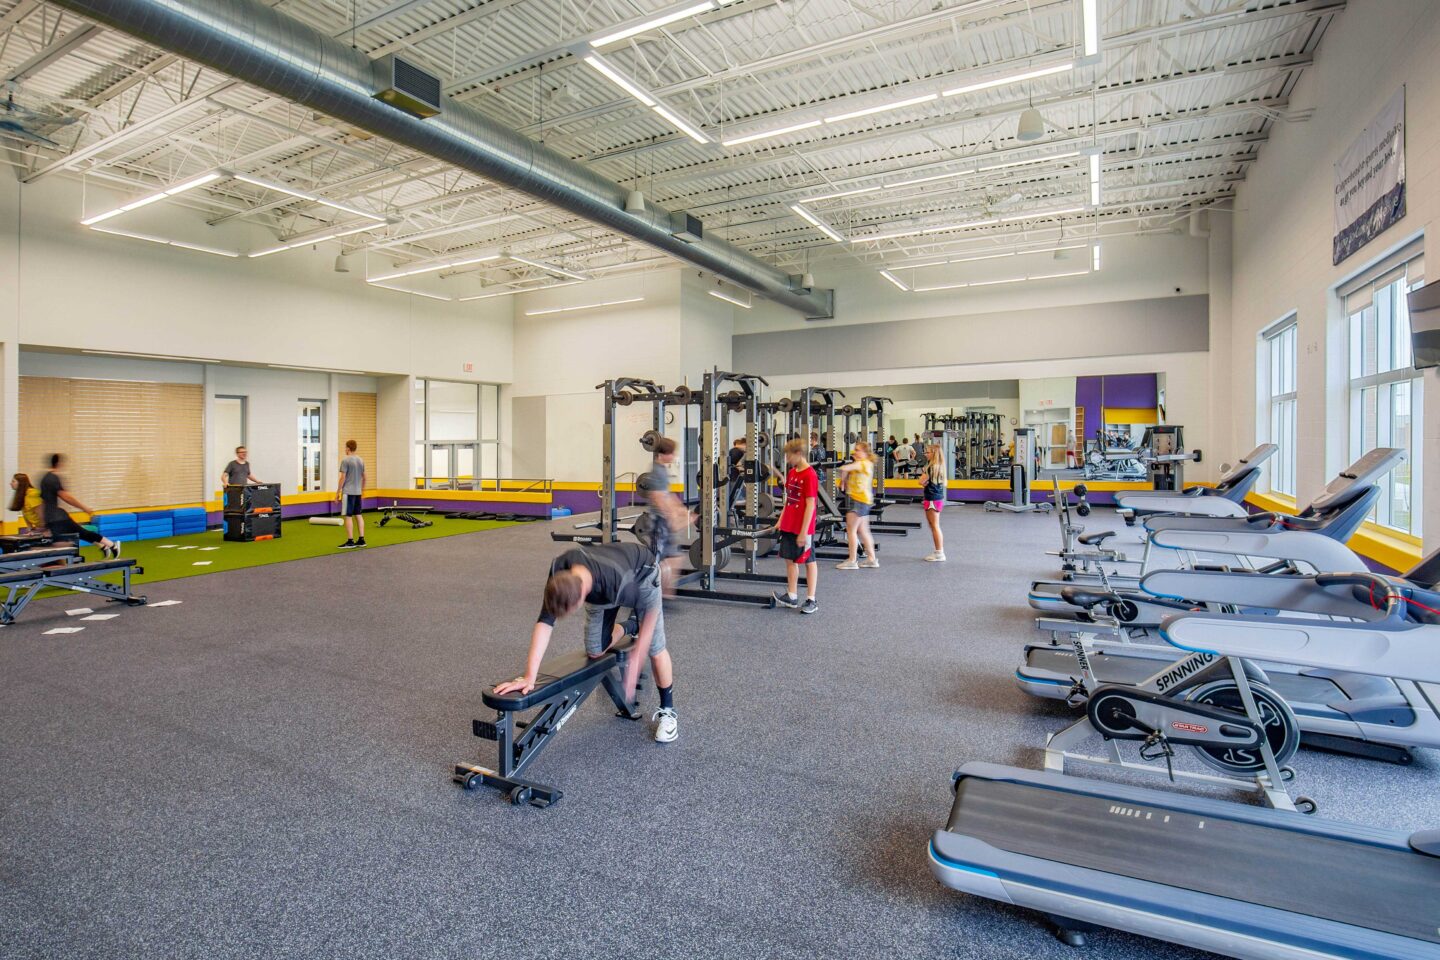 Students utilize the equipment in the new fitness center, which includes tall ceilings and large windows to create a bright and spacious environment